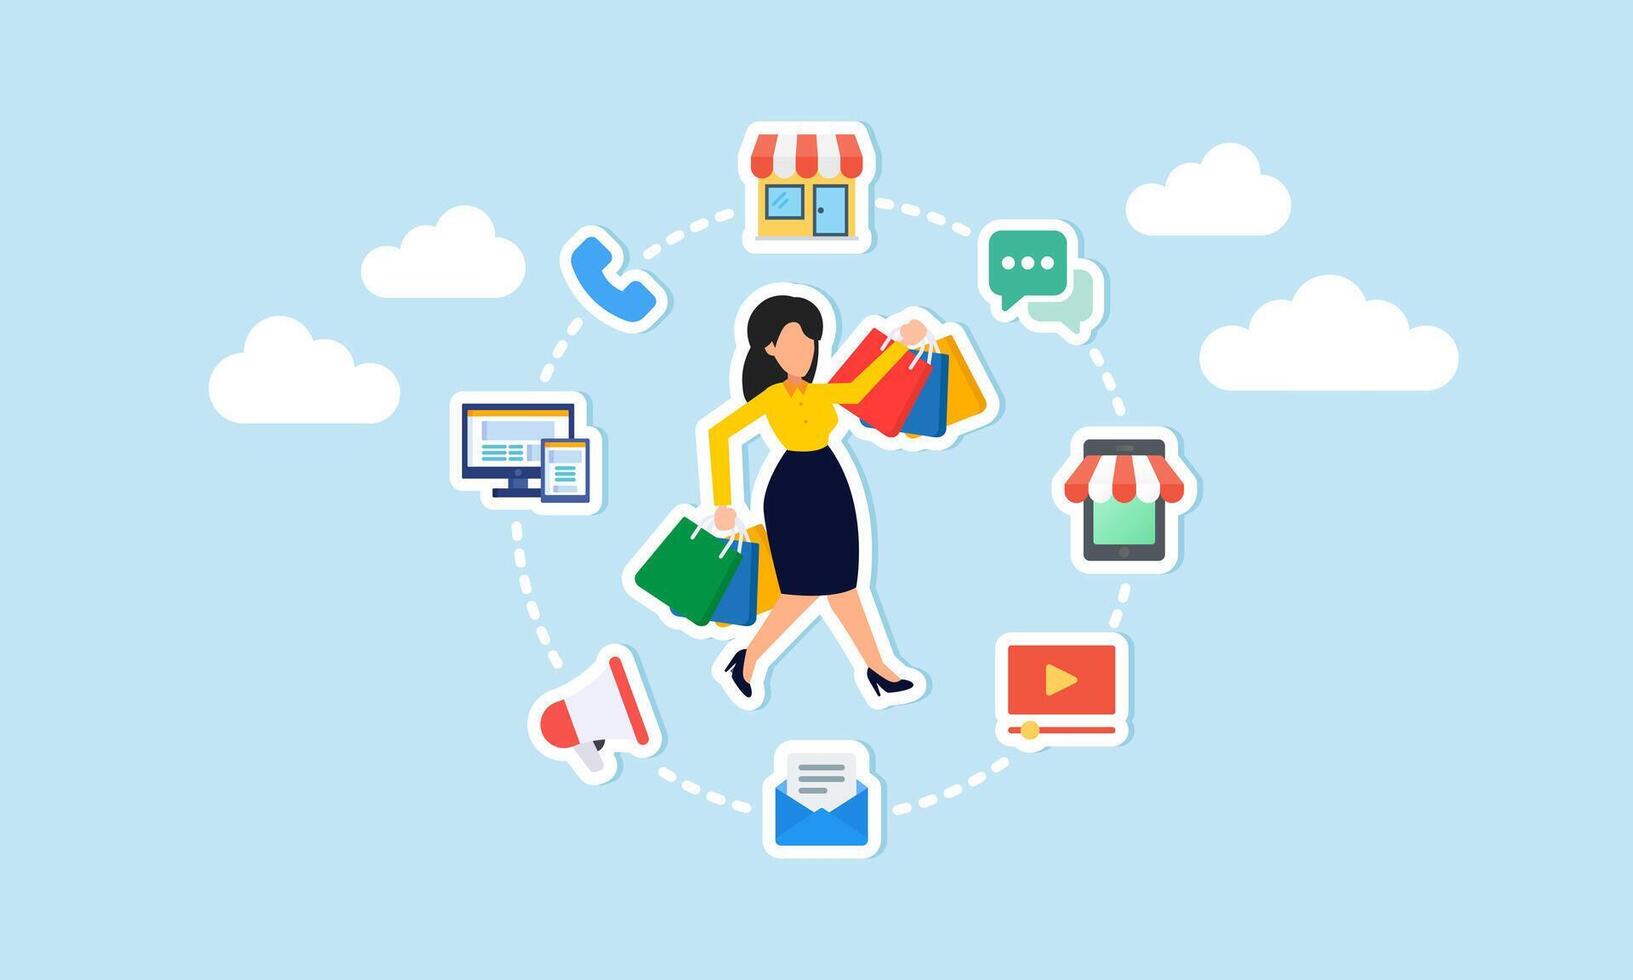 Omnichannel marketing offers multiple channels for customers to purchase products young woman customer with shopping bags buying from multi channel store website, mobile and other chat and call center vector